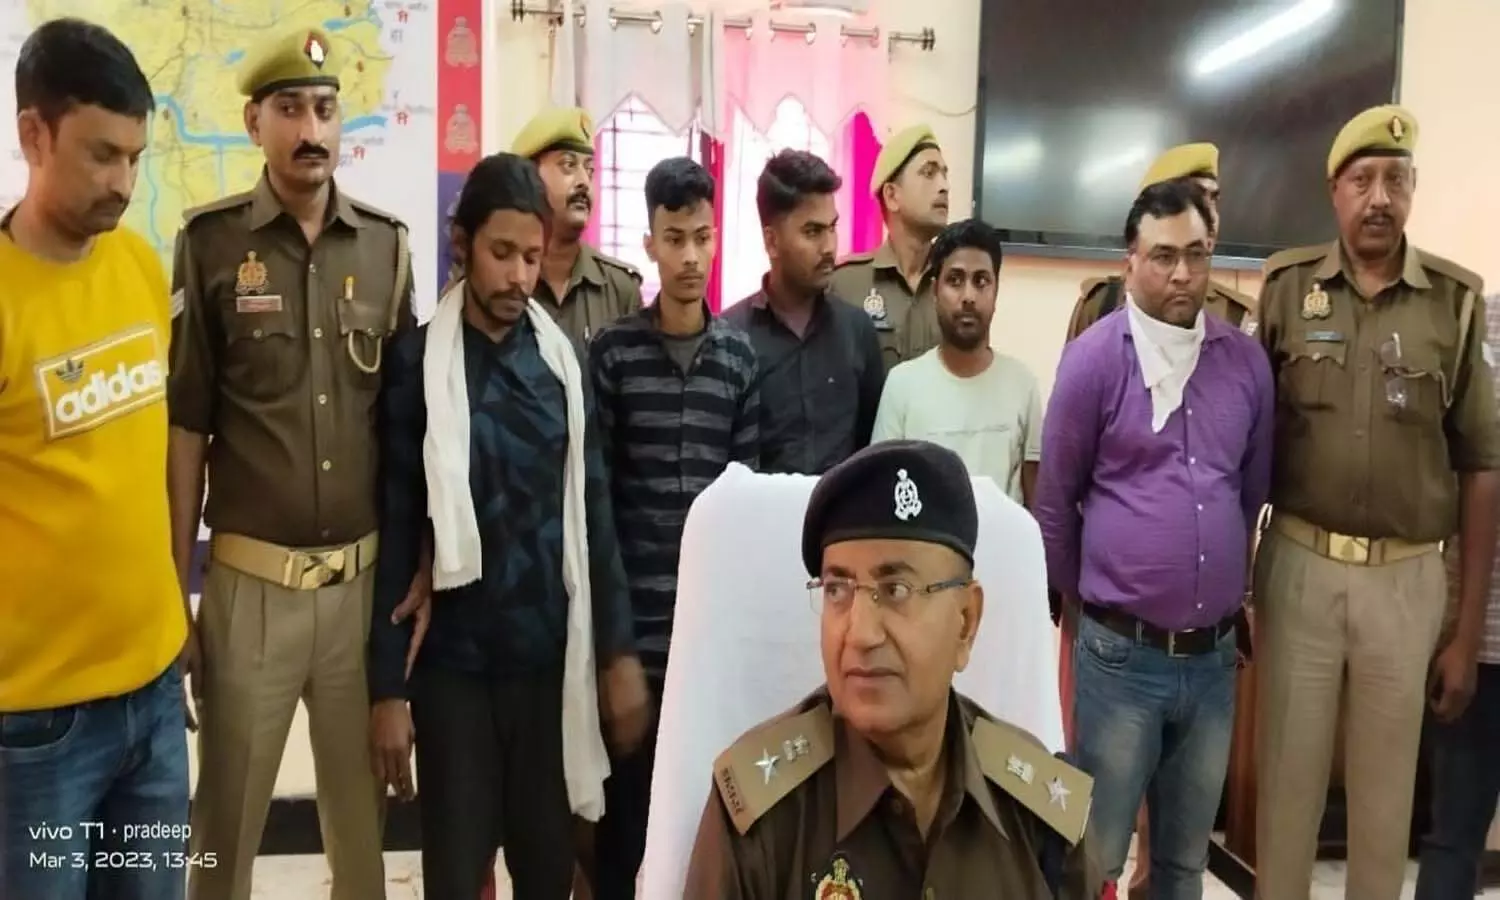 Gang arrested for issuing fake death certificate of Haryana CM in Sonbhadra